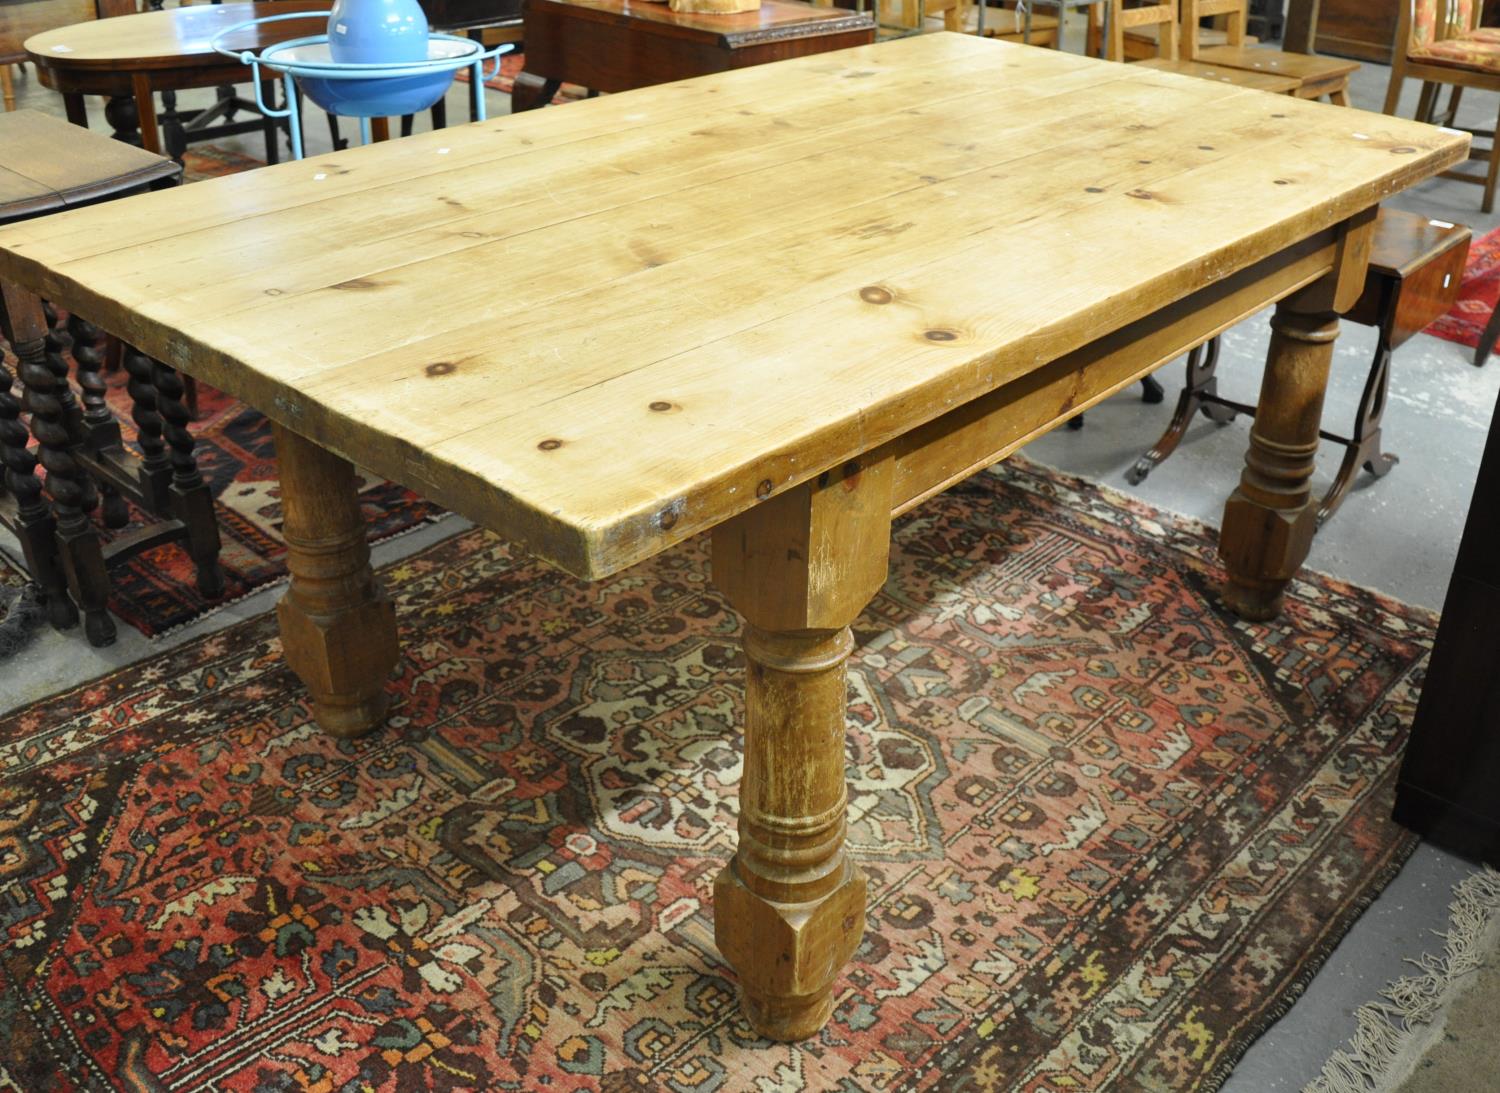 Large modern pine farmhouse kitchen table on baluster turned legs. 182 x 104 x 78 cm approx. (B.P.